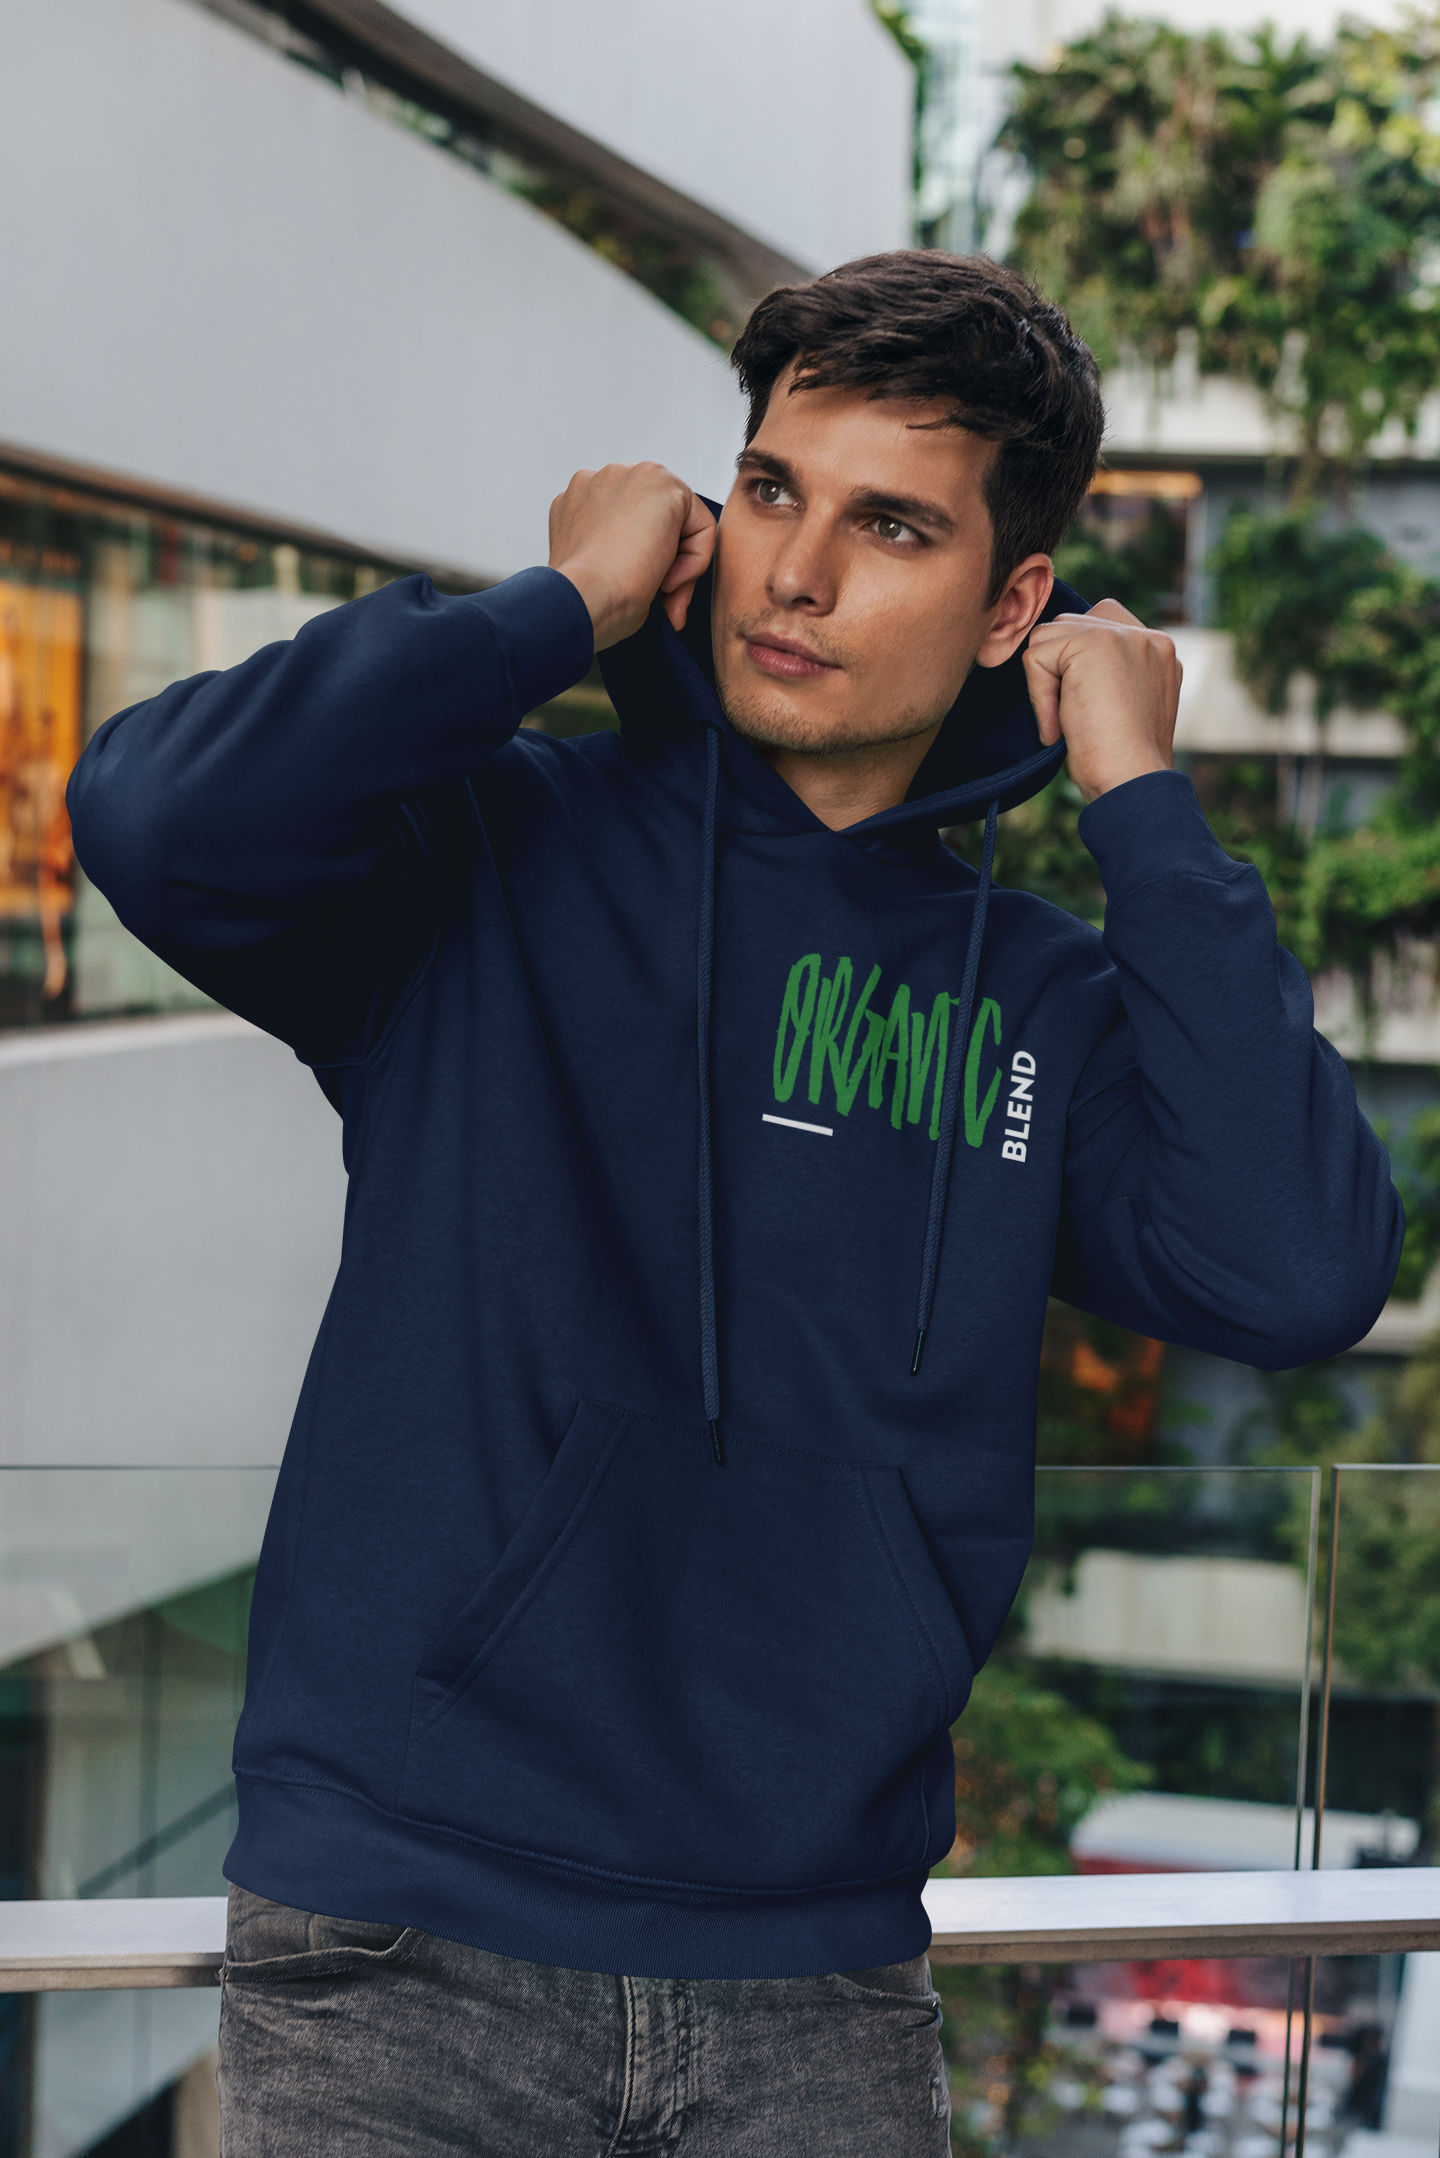 hoodie-mockup-featuring-a-man-with-short-hair-5120-el1.png